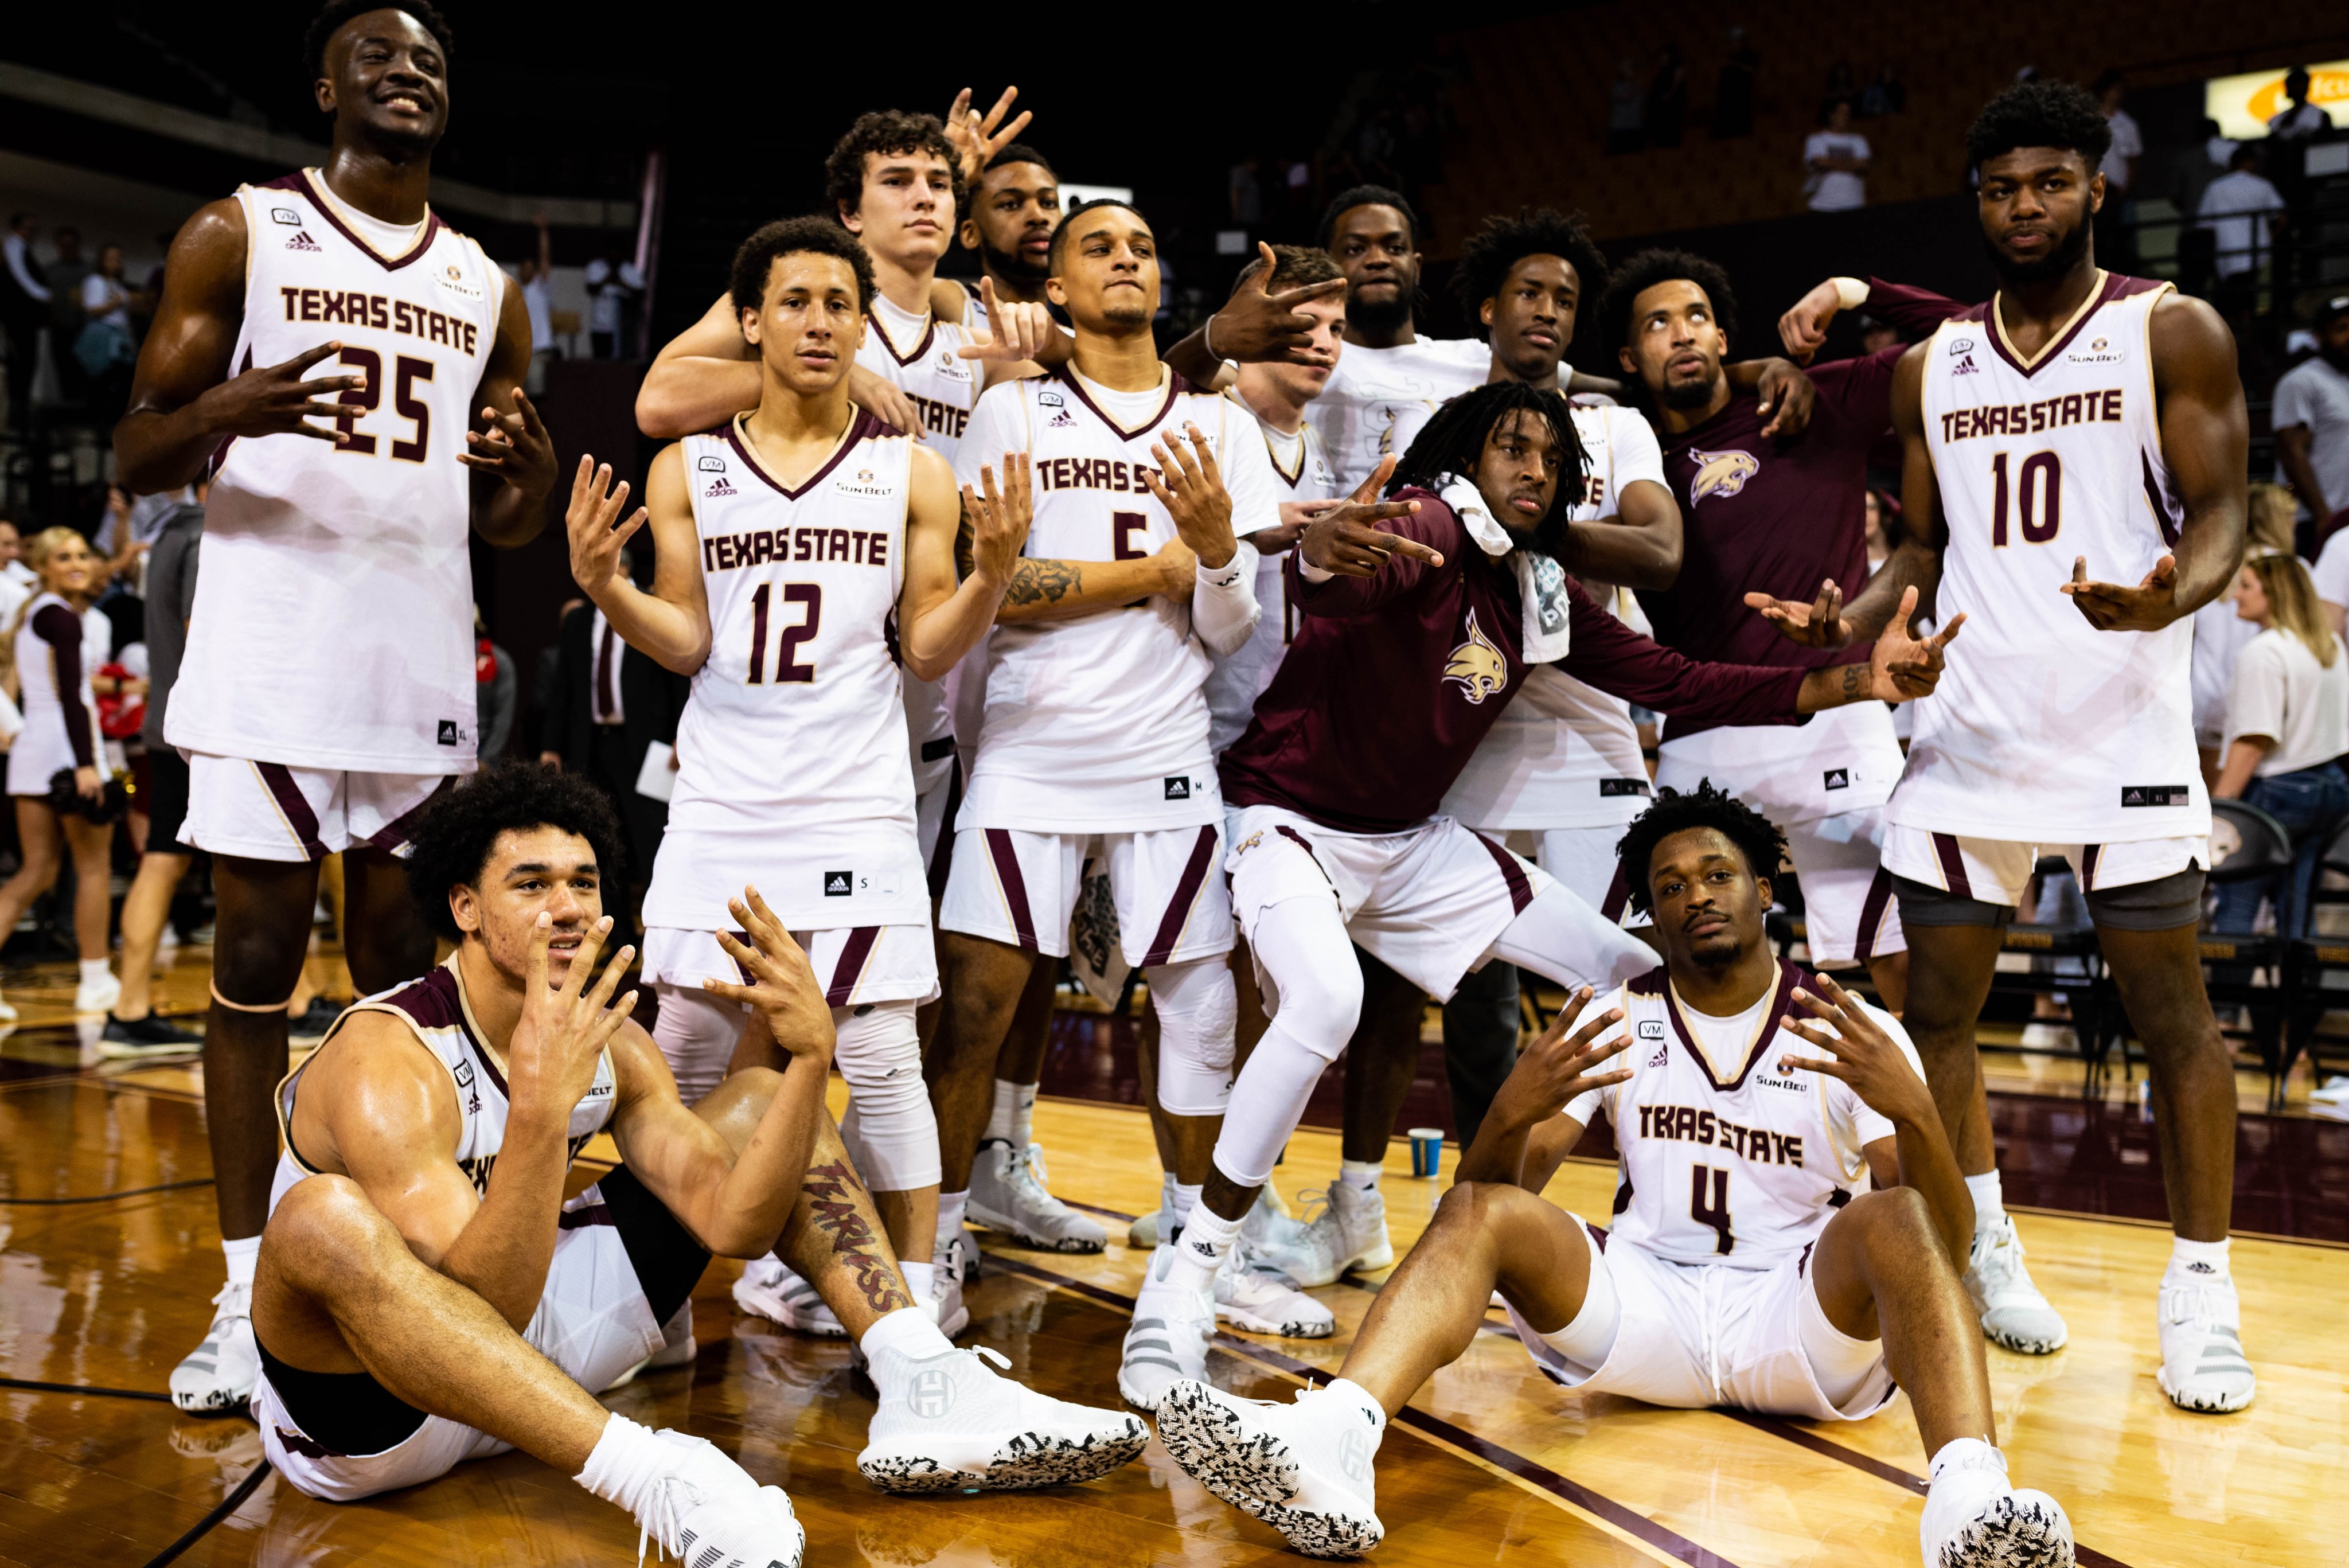 Texas State MBB on Twitter: "Best record among #SunBeltMBB teams the last 4  years? The 'Cats #EatEmUp https://t.co/xI28qmpT7T" / X